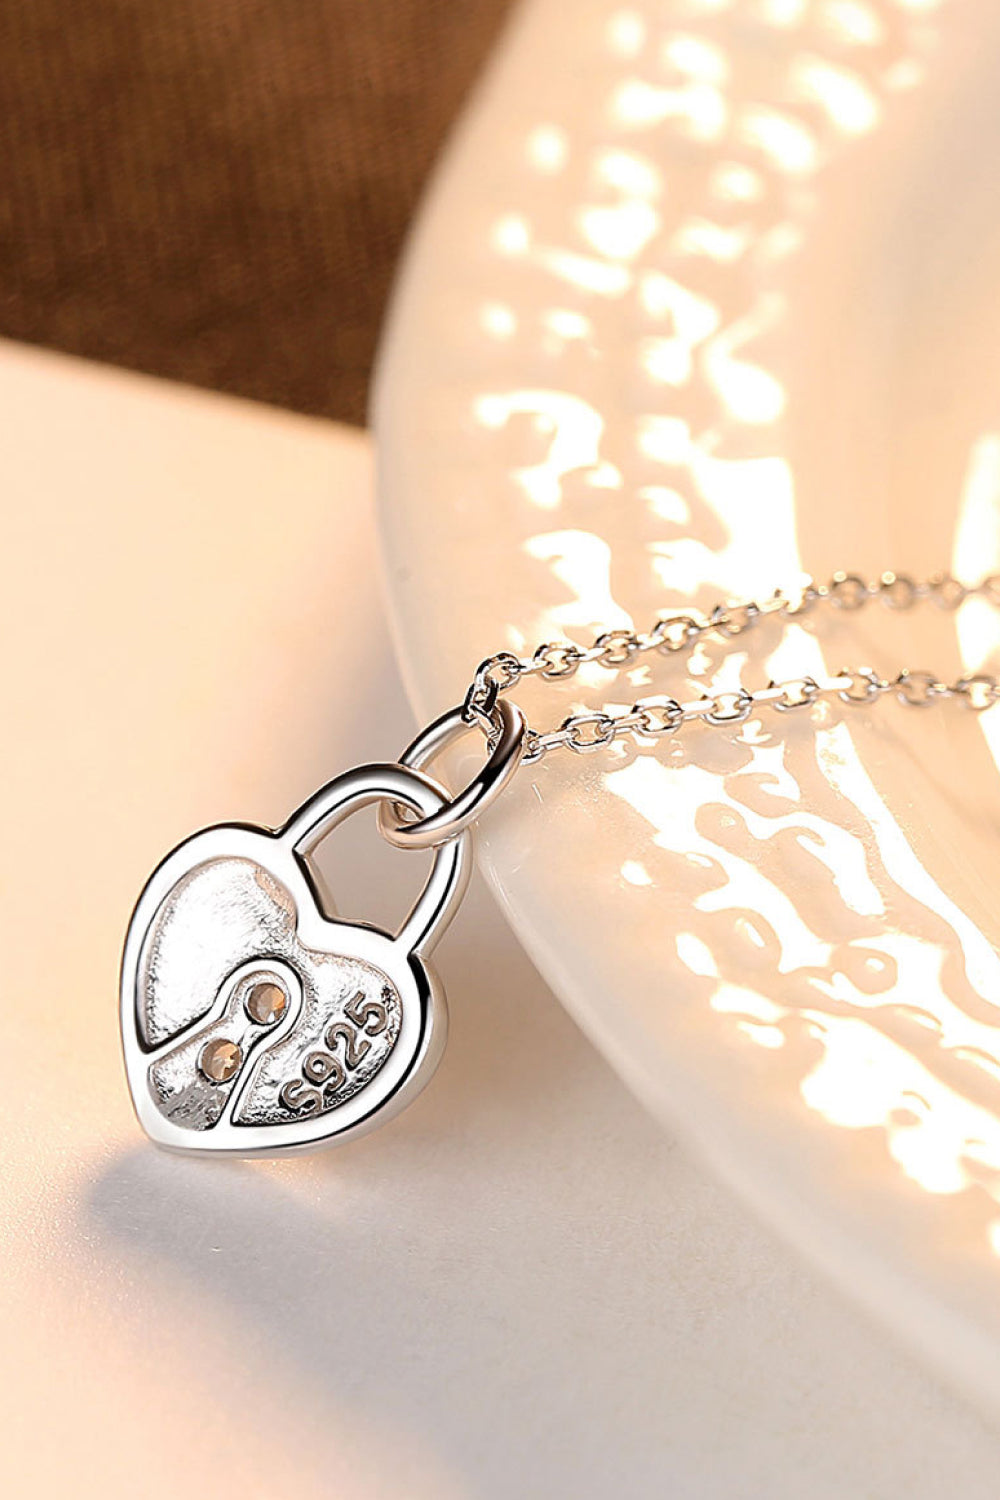 Uylee's Boutique Heart Lock Pendant 925 Sterling Silver Necklace